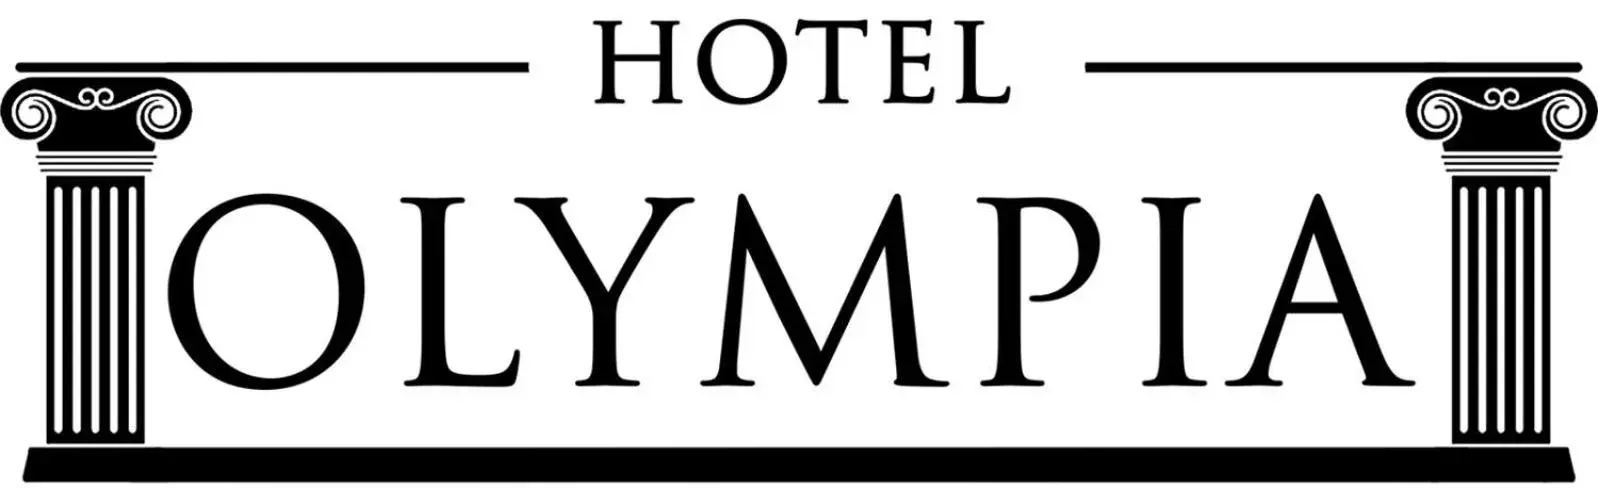 Property logo or sign, Property Logo/Sign in Hotel Olympia